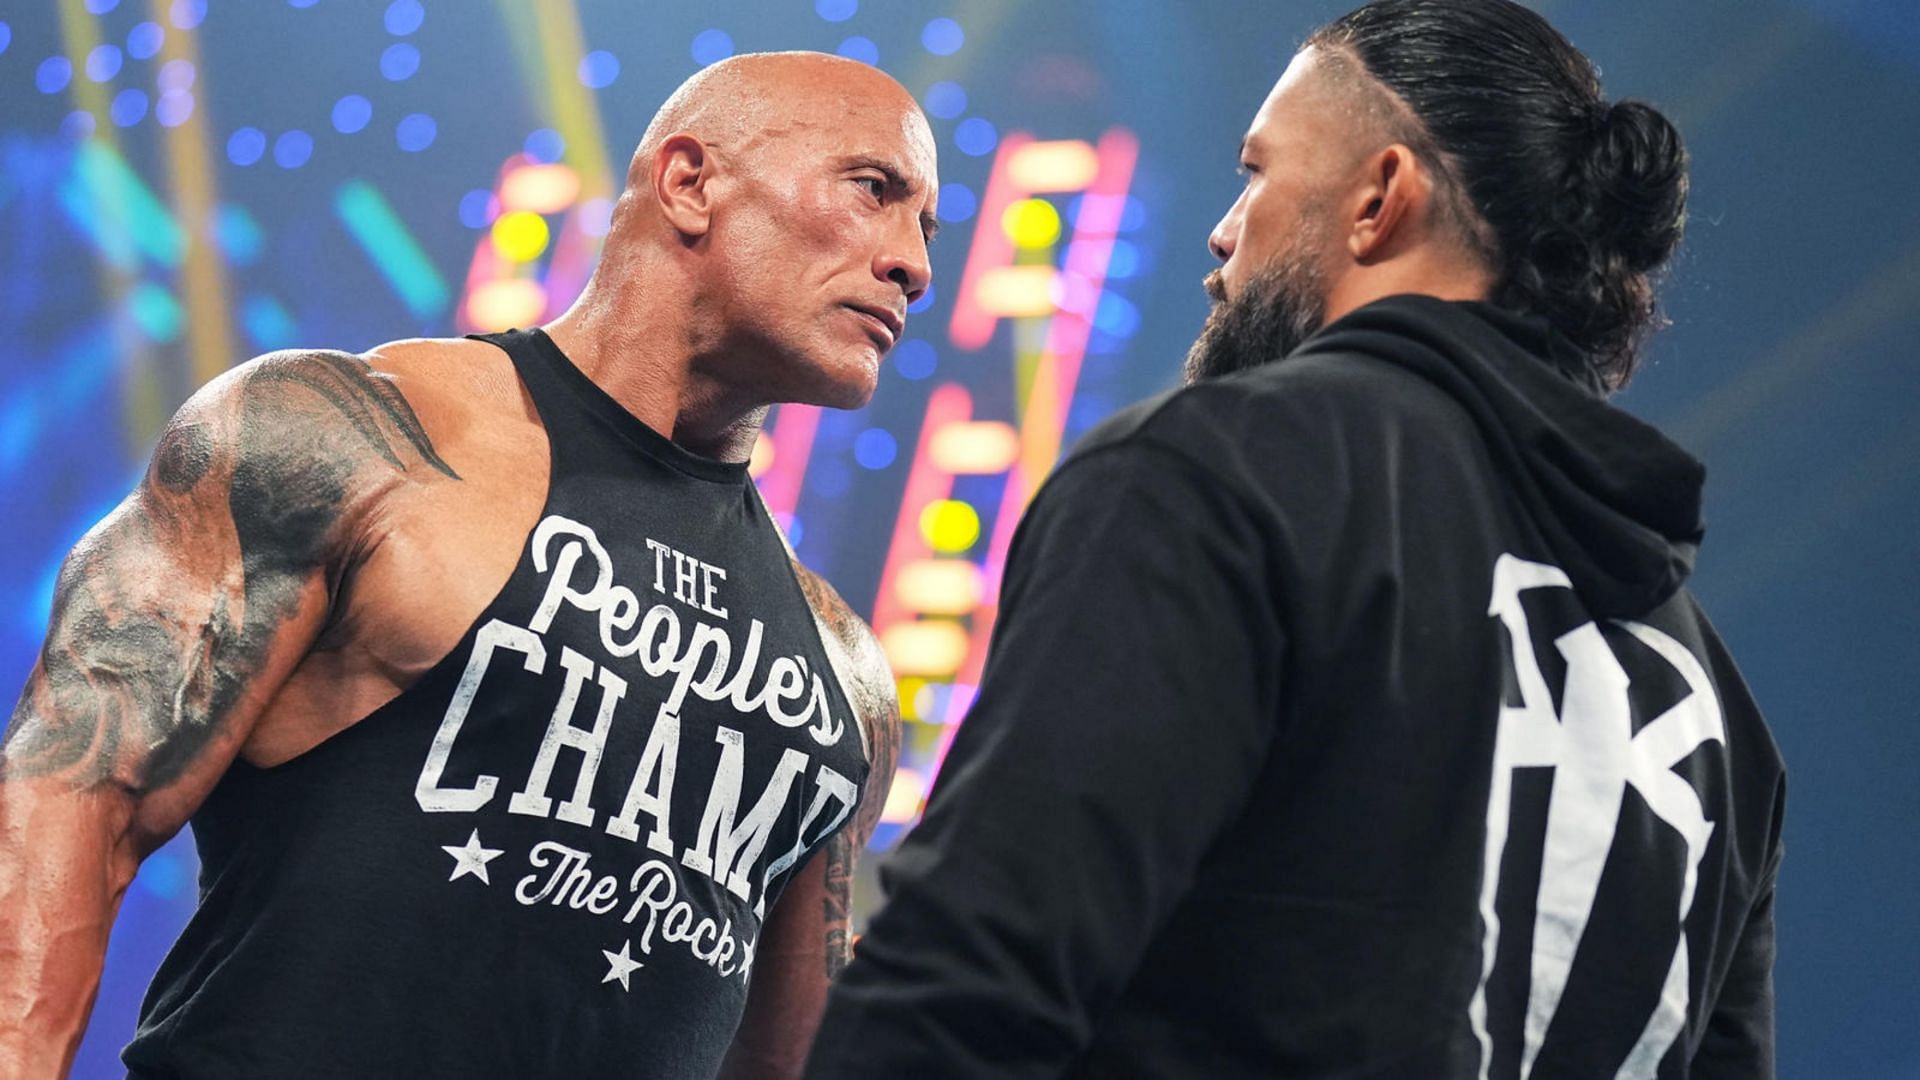 The Rock and Roman Reigns face-to-face